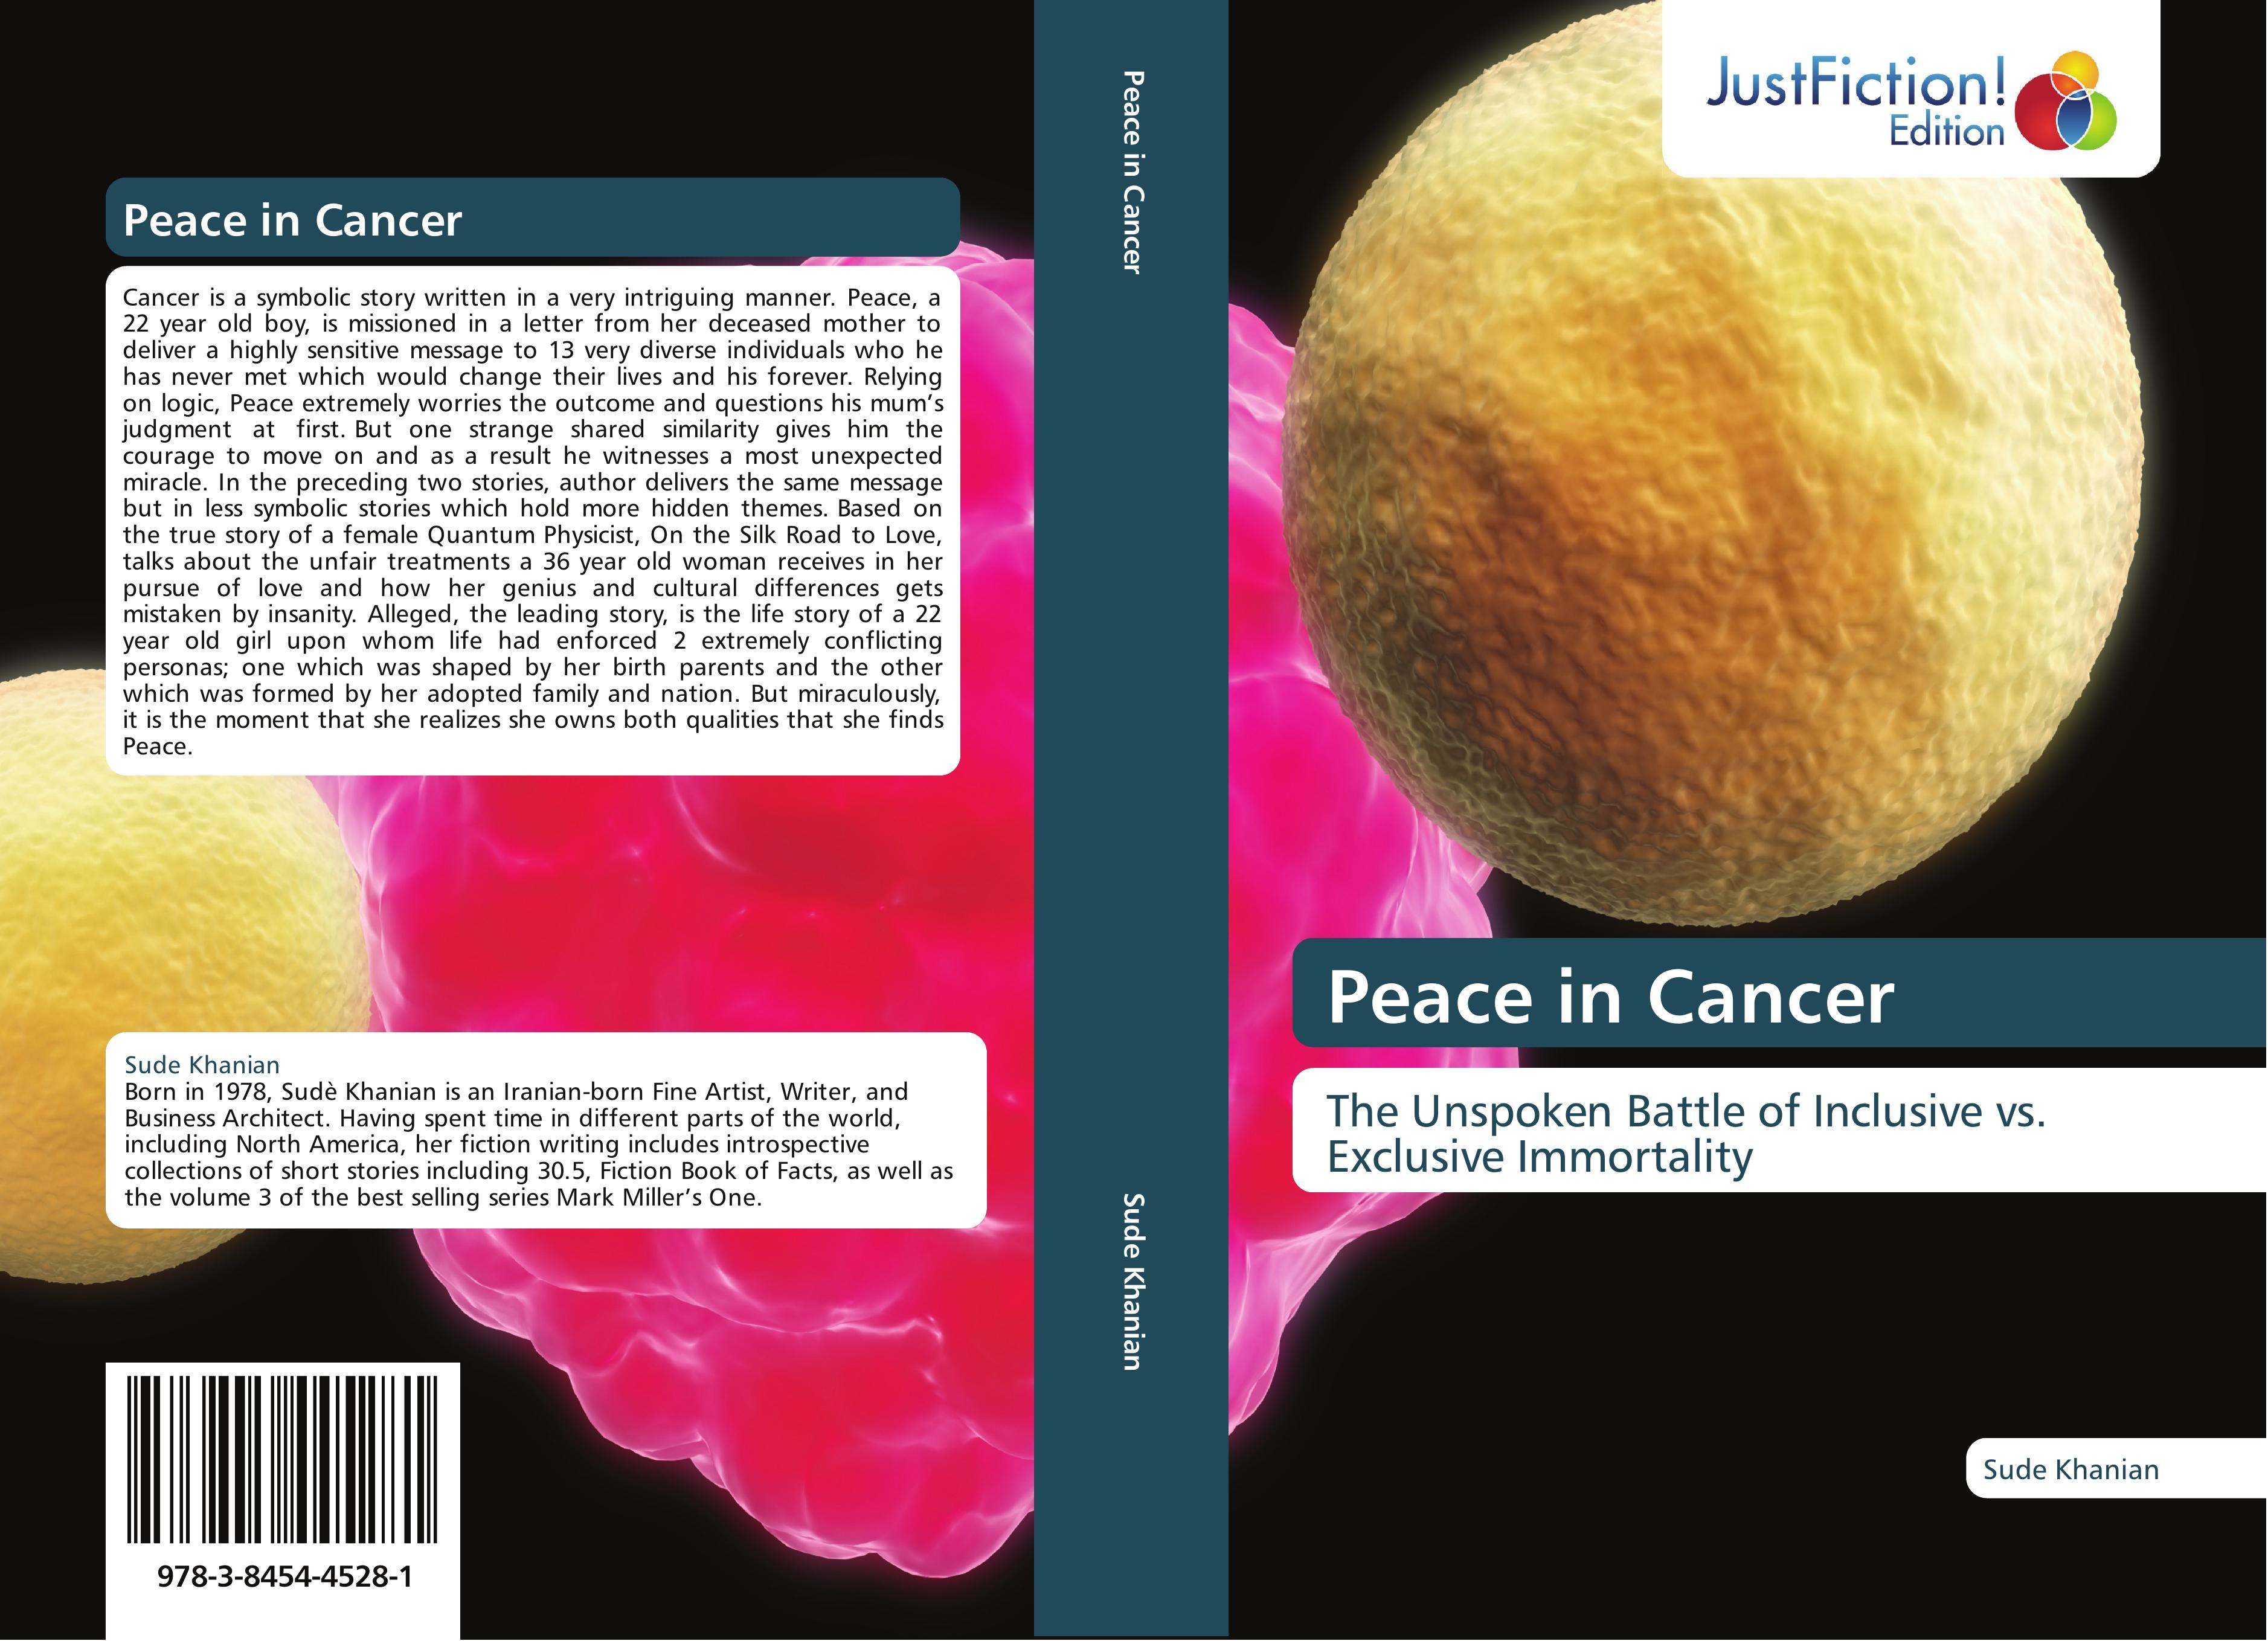 Peace in Cancer | The Unspoken Battle of Inclusive vs. Exclusive Immortality | Sude Khanian | Taschenbuch | Paperback | 132 S. | Englisch | 2012 | JustFiction Edition | EAN 9783845445281 - Khanian, Sude